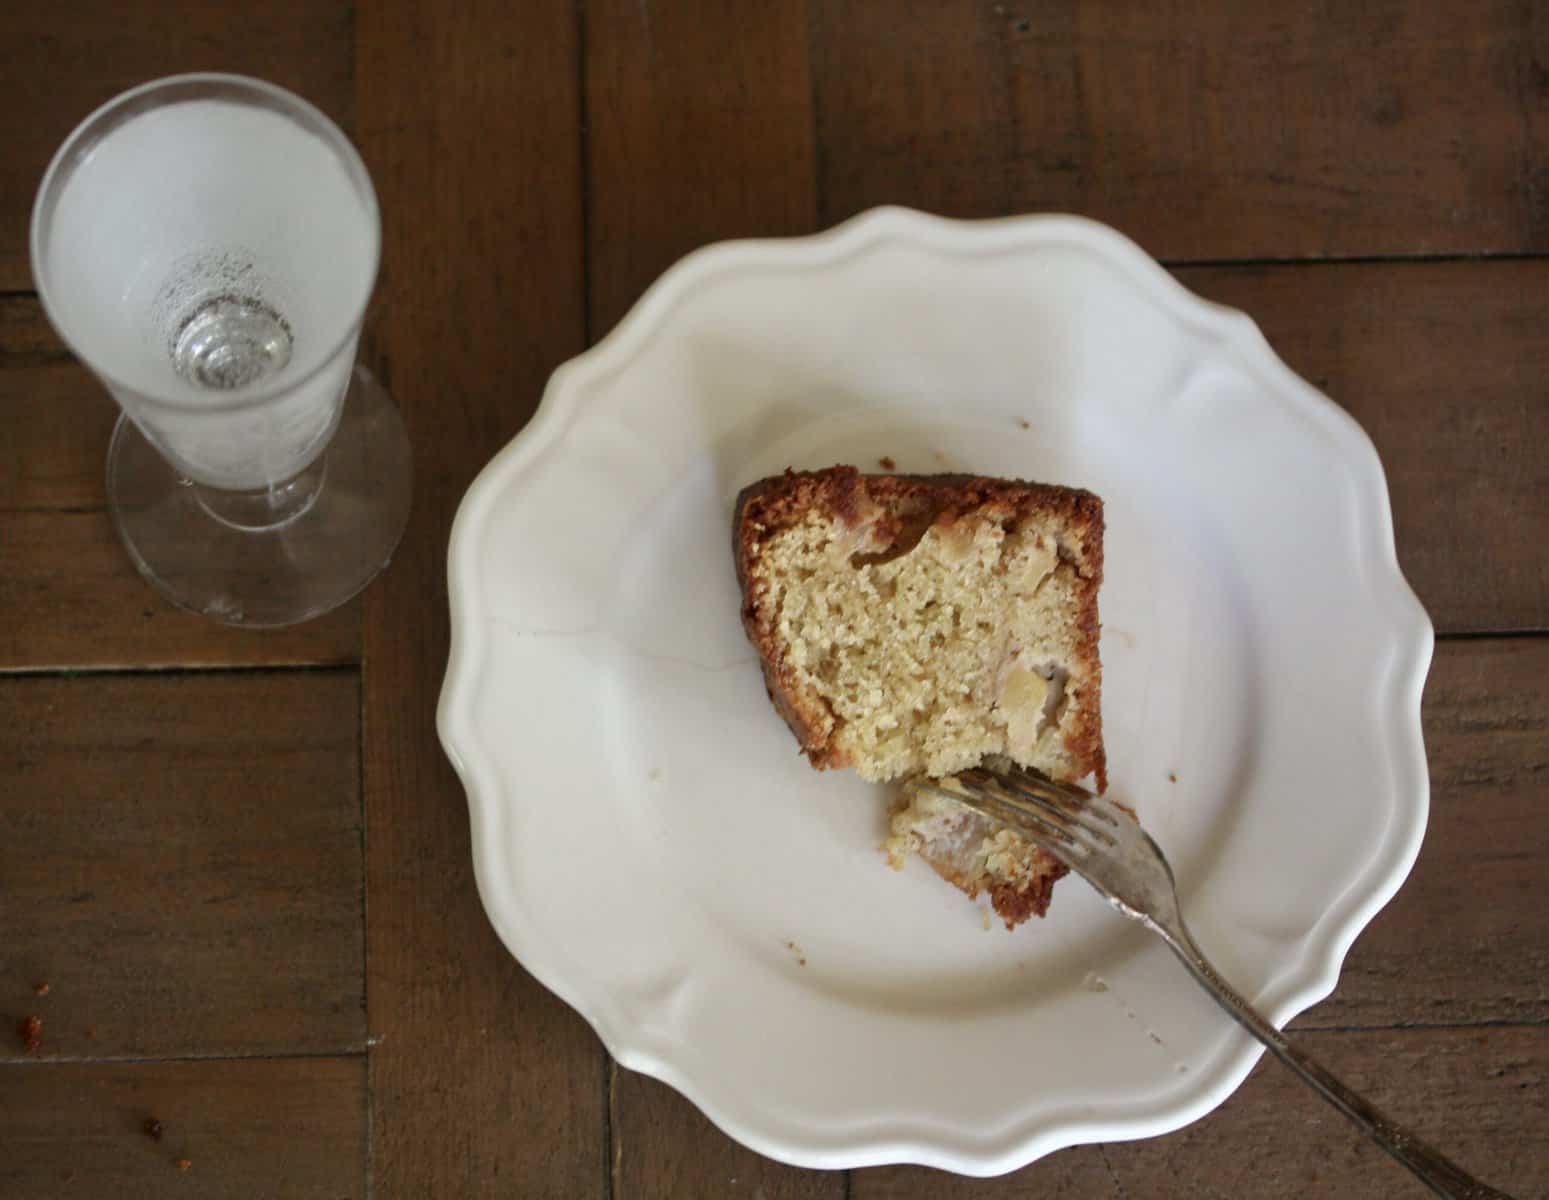 An overview shot of a plate with a piece of gluten-free pear cake.